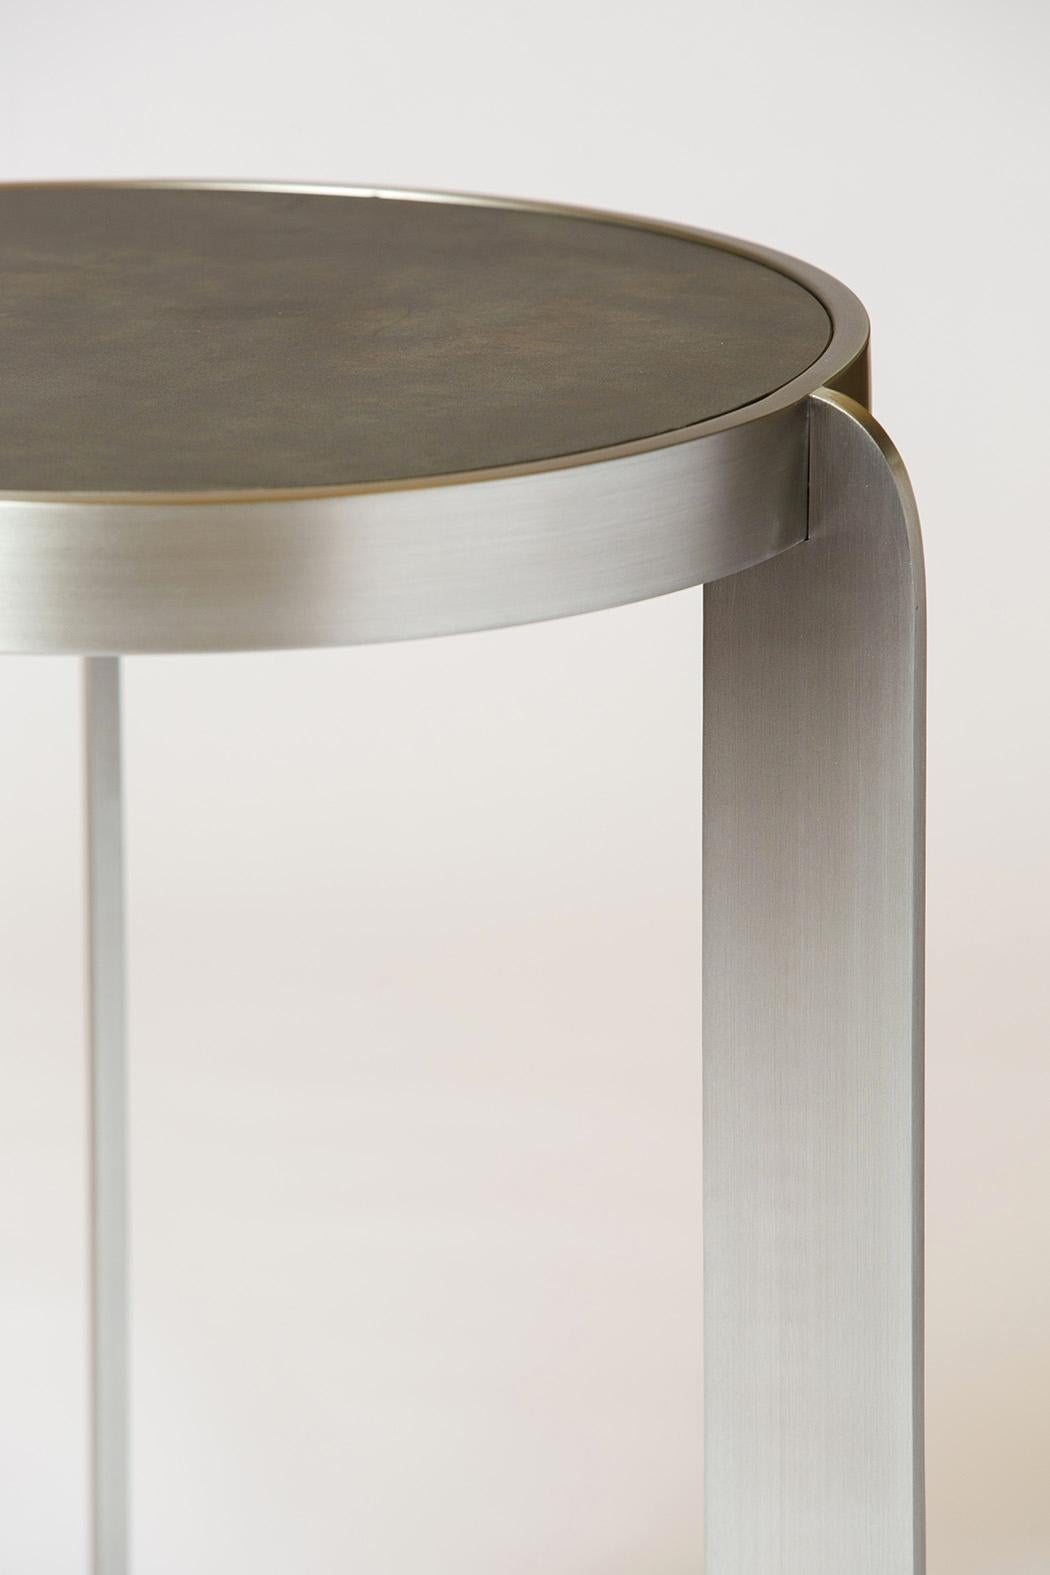 Materico Side table is defined by sophisticated simplicity that create an unexpected and iconic object. The enigmatic suggestions of his ceramic sculptures are likewise revealed in the forms of the Materico, where important and heavy materials, such